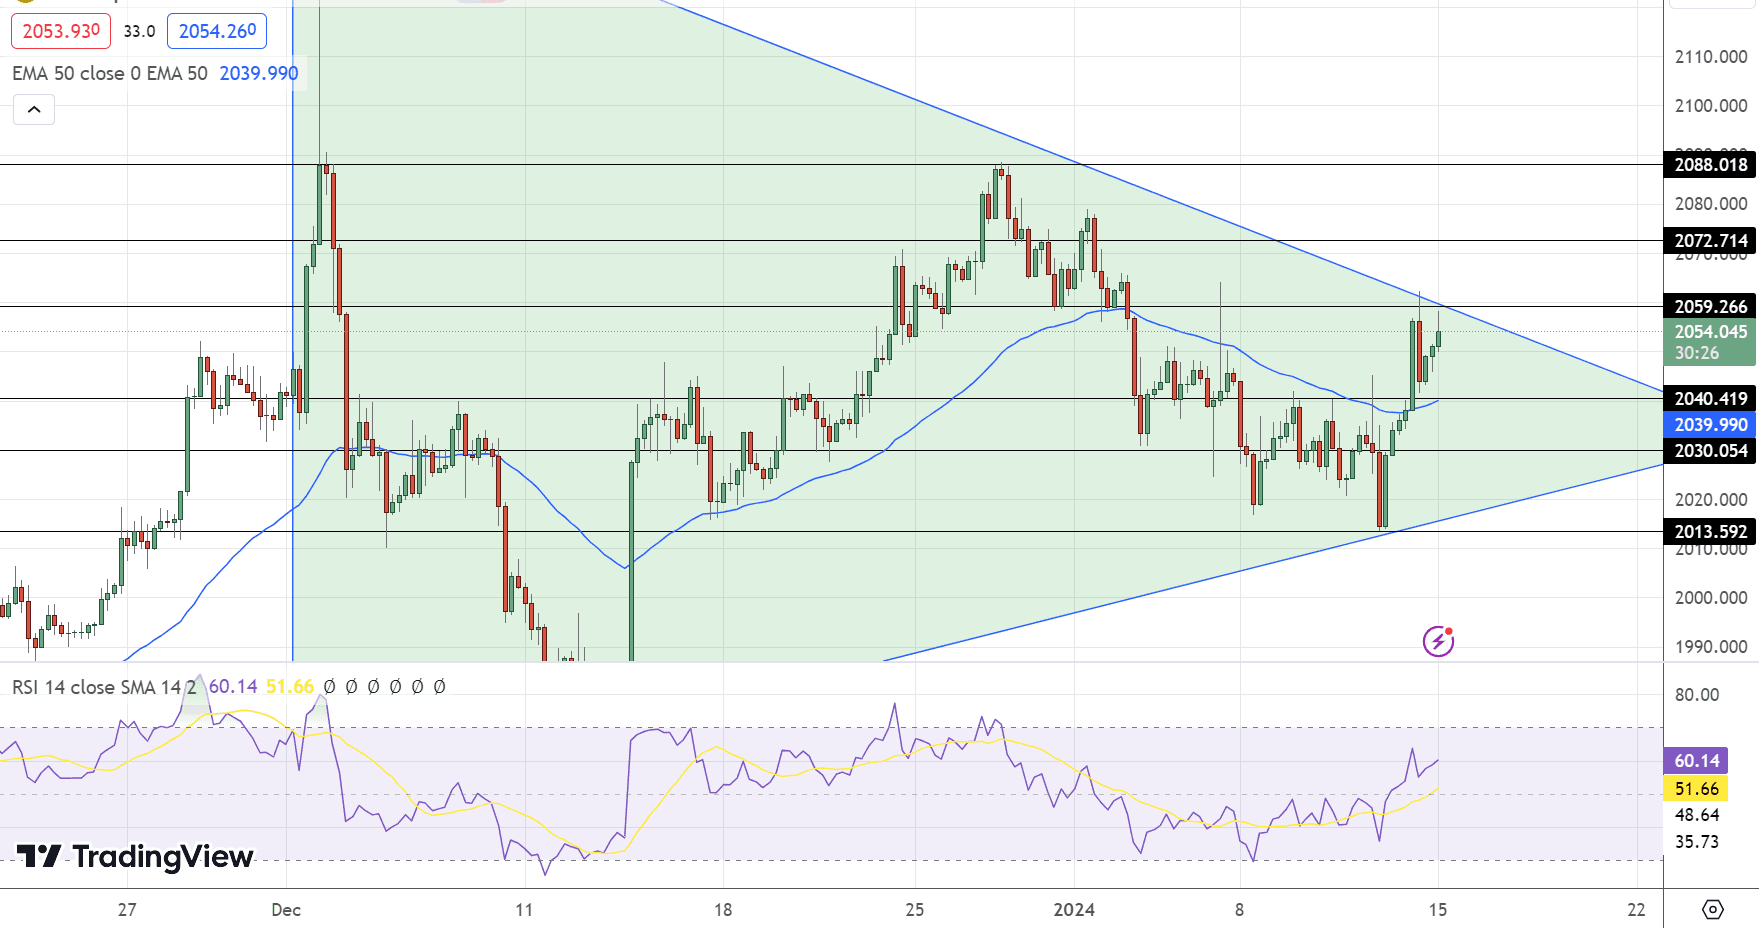 GOLD Price Chart - Source: Tradingview